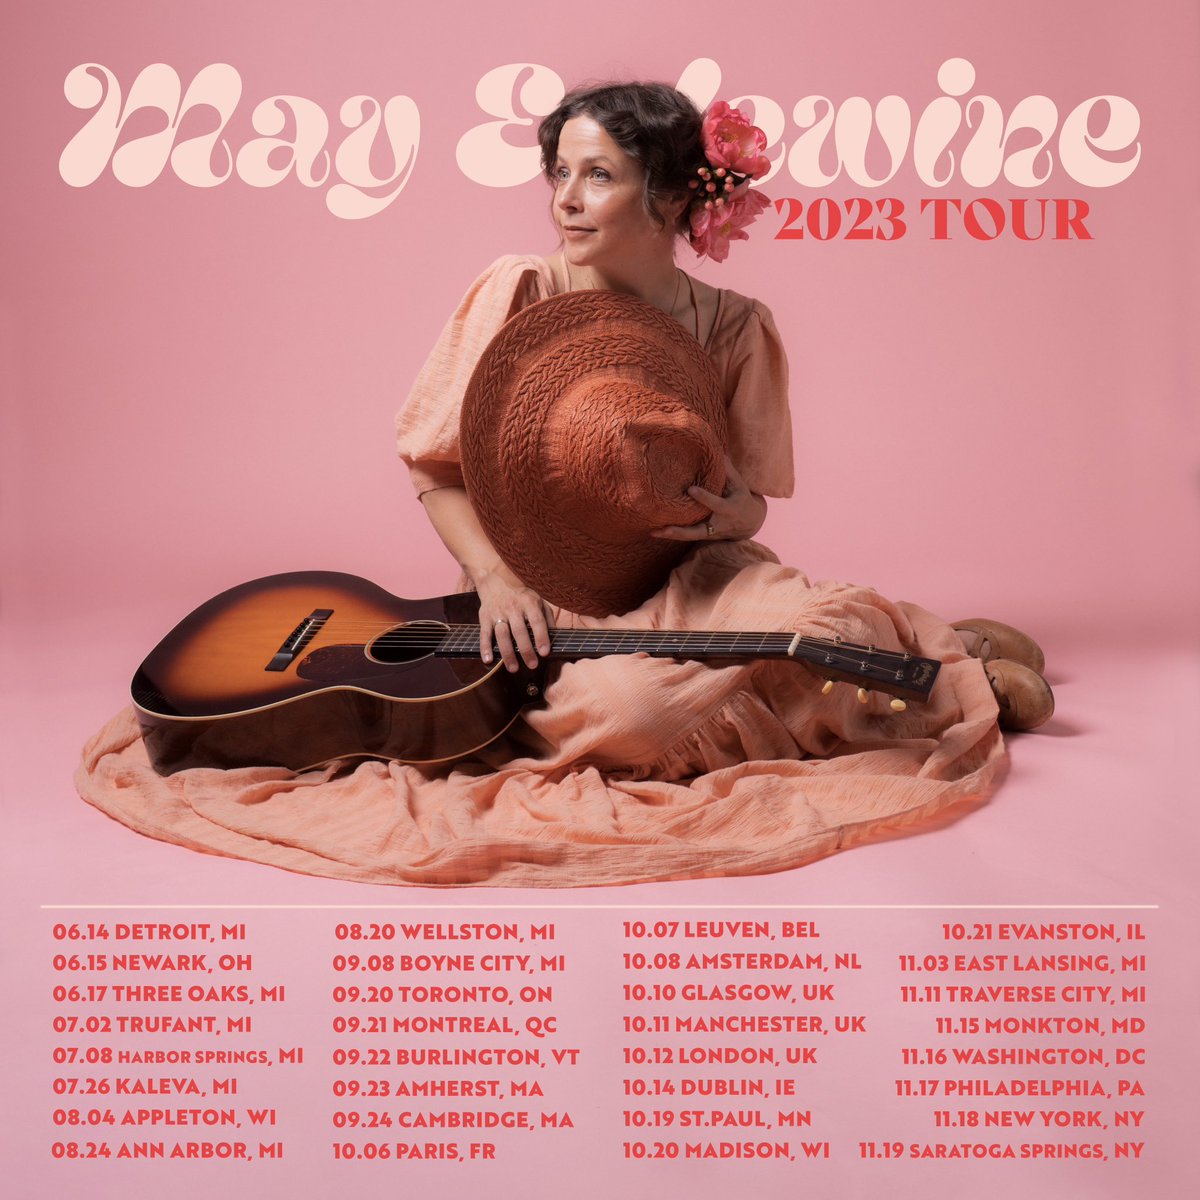 Tour Dates and collaborations for 2023 mayerlewine.com/shows